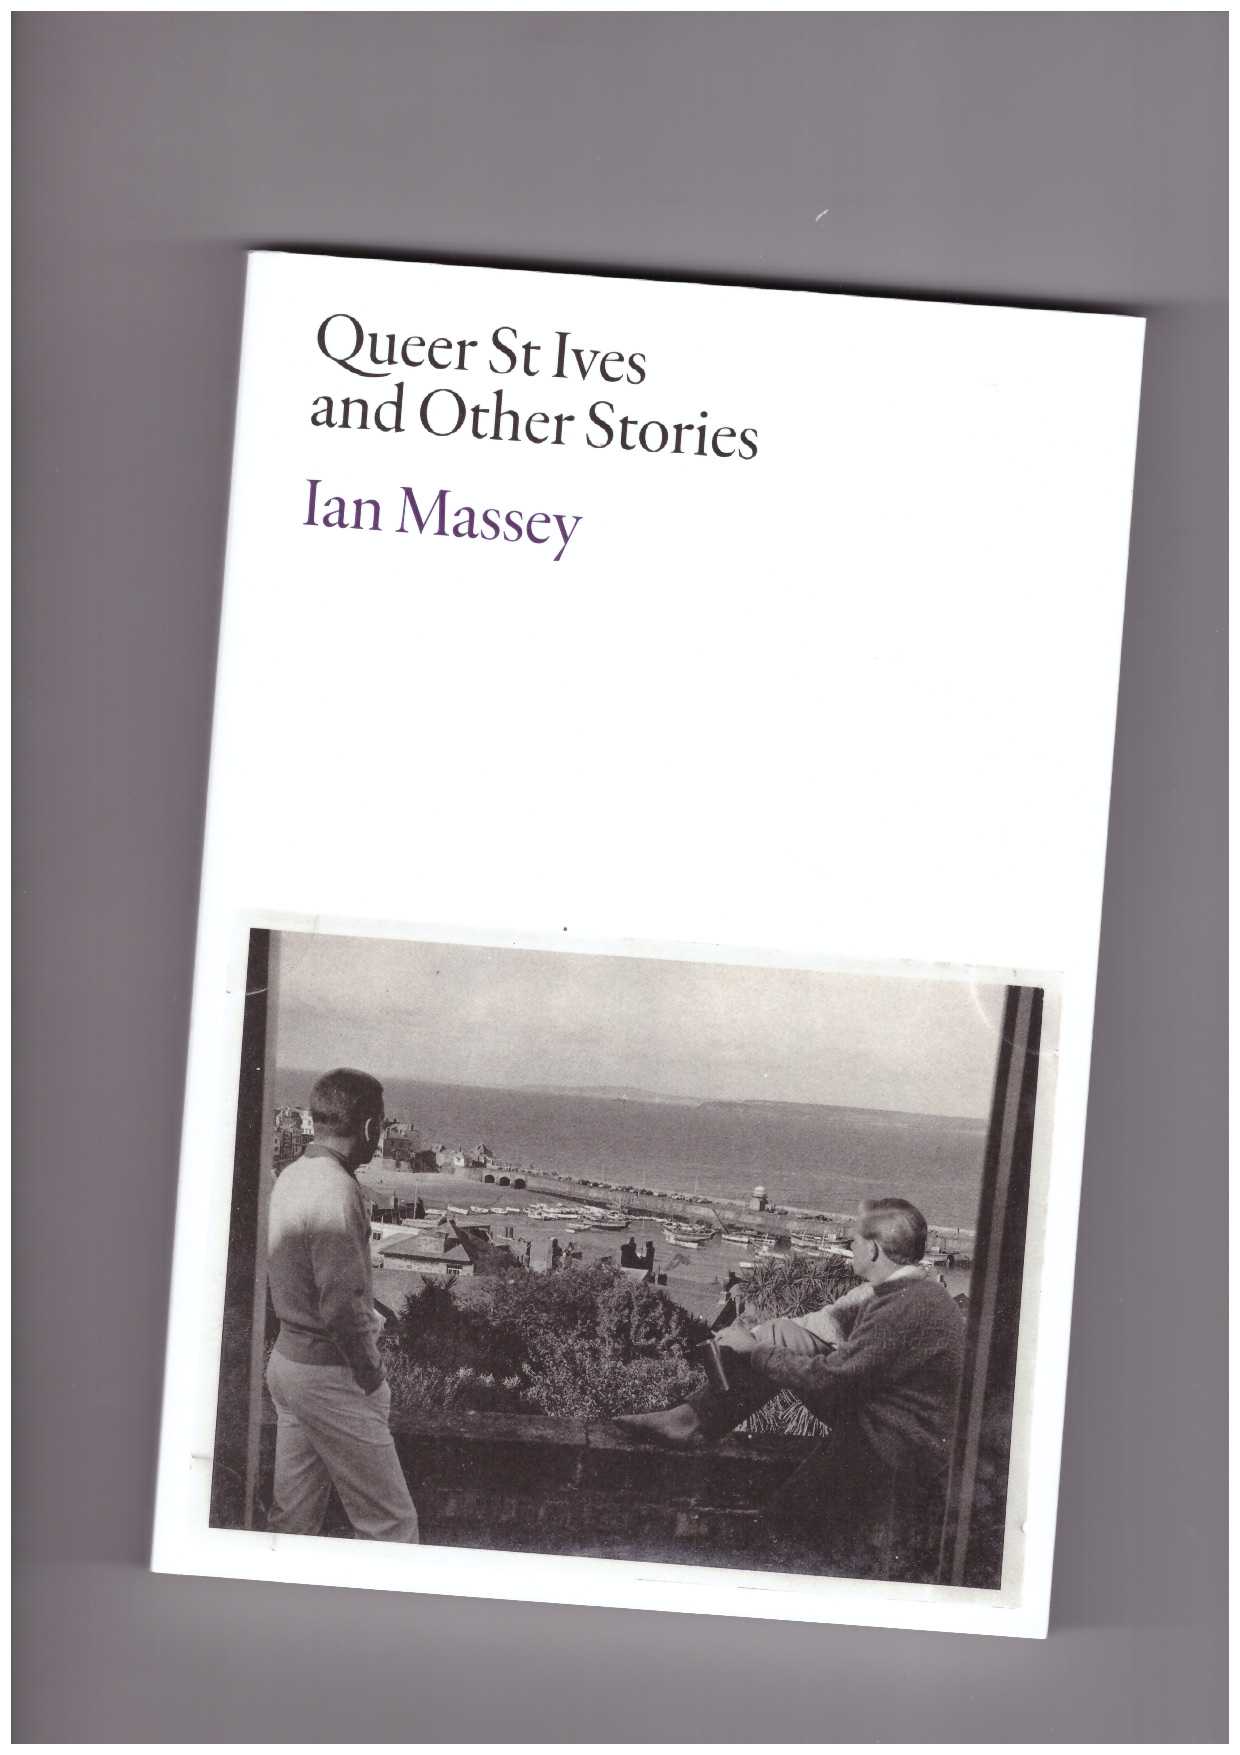 MASSEY, Ian - Queer St Ives and Other Stories